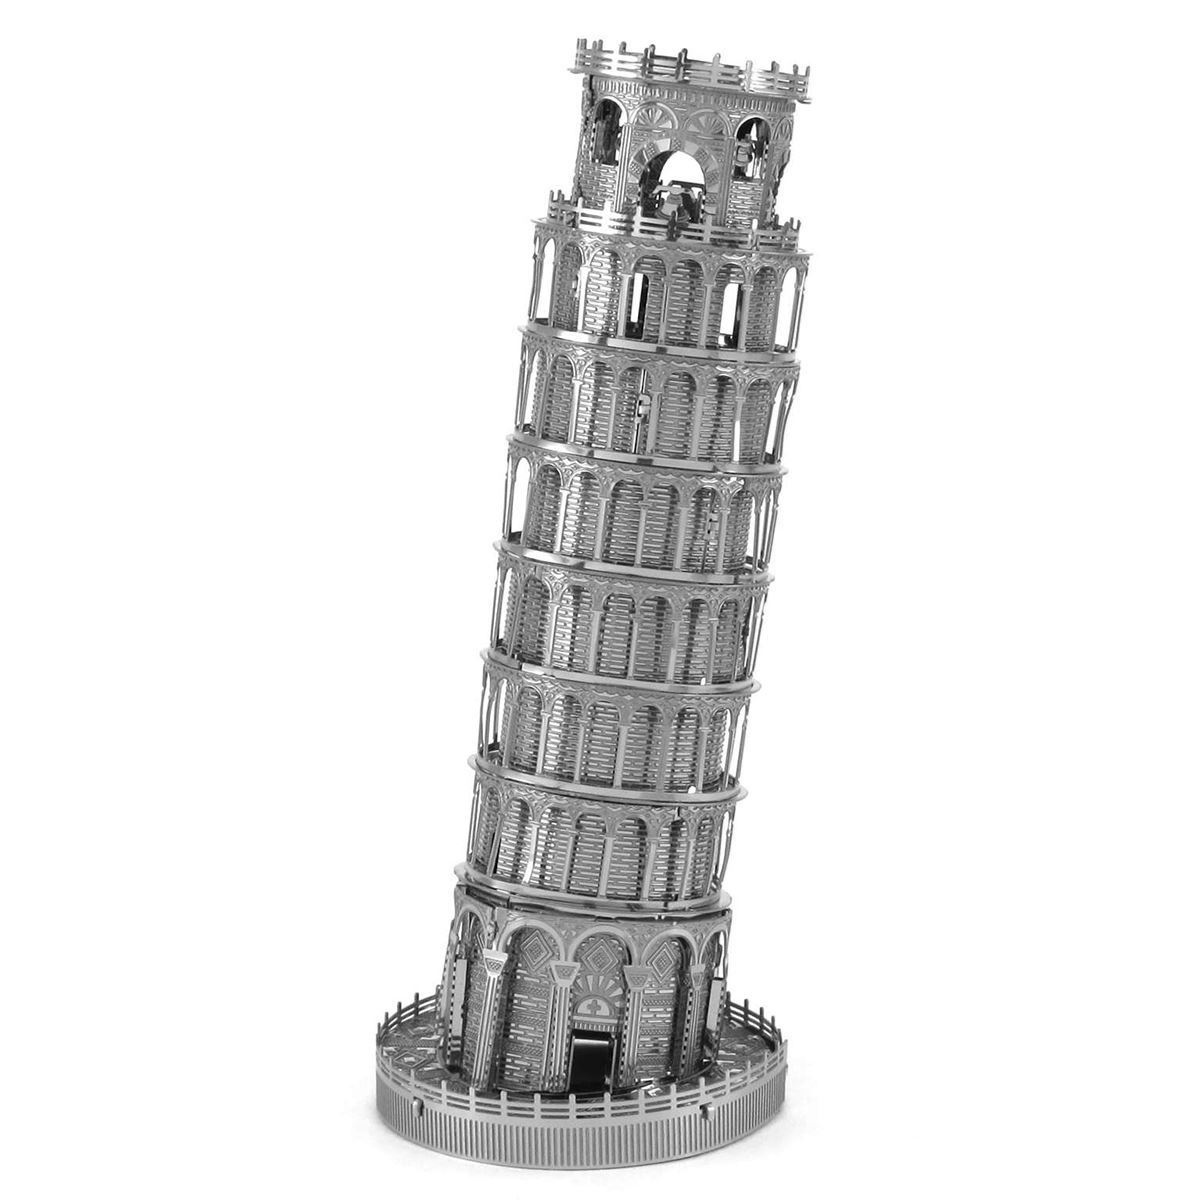 Leaning Tower of Pisa ICX015 ICONX Metal Earth 3D Model Kit 